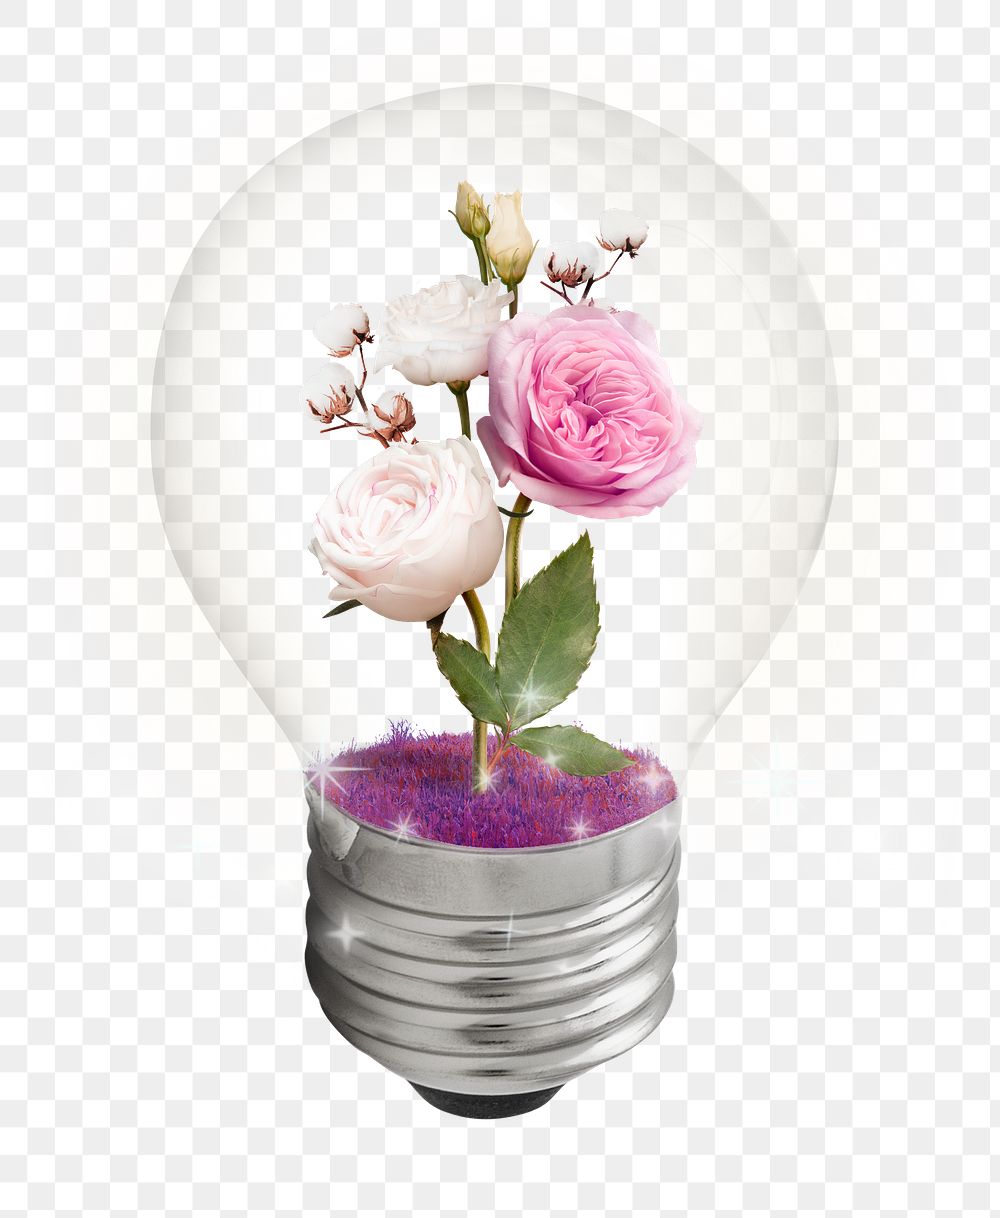 Blooming light bulb png sticker, transparent background